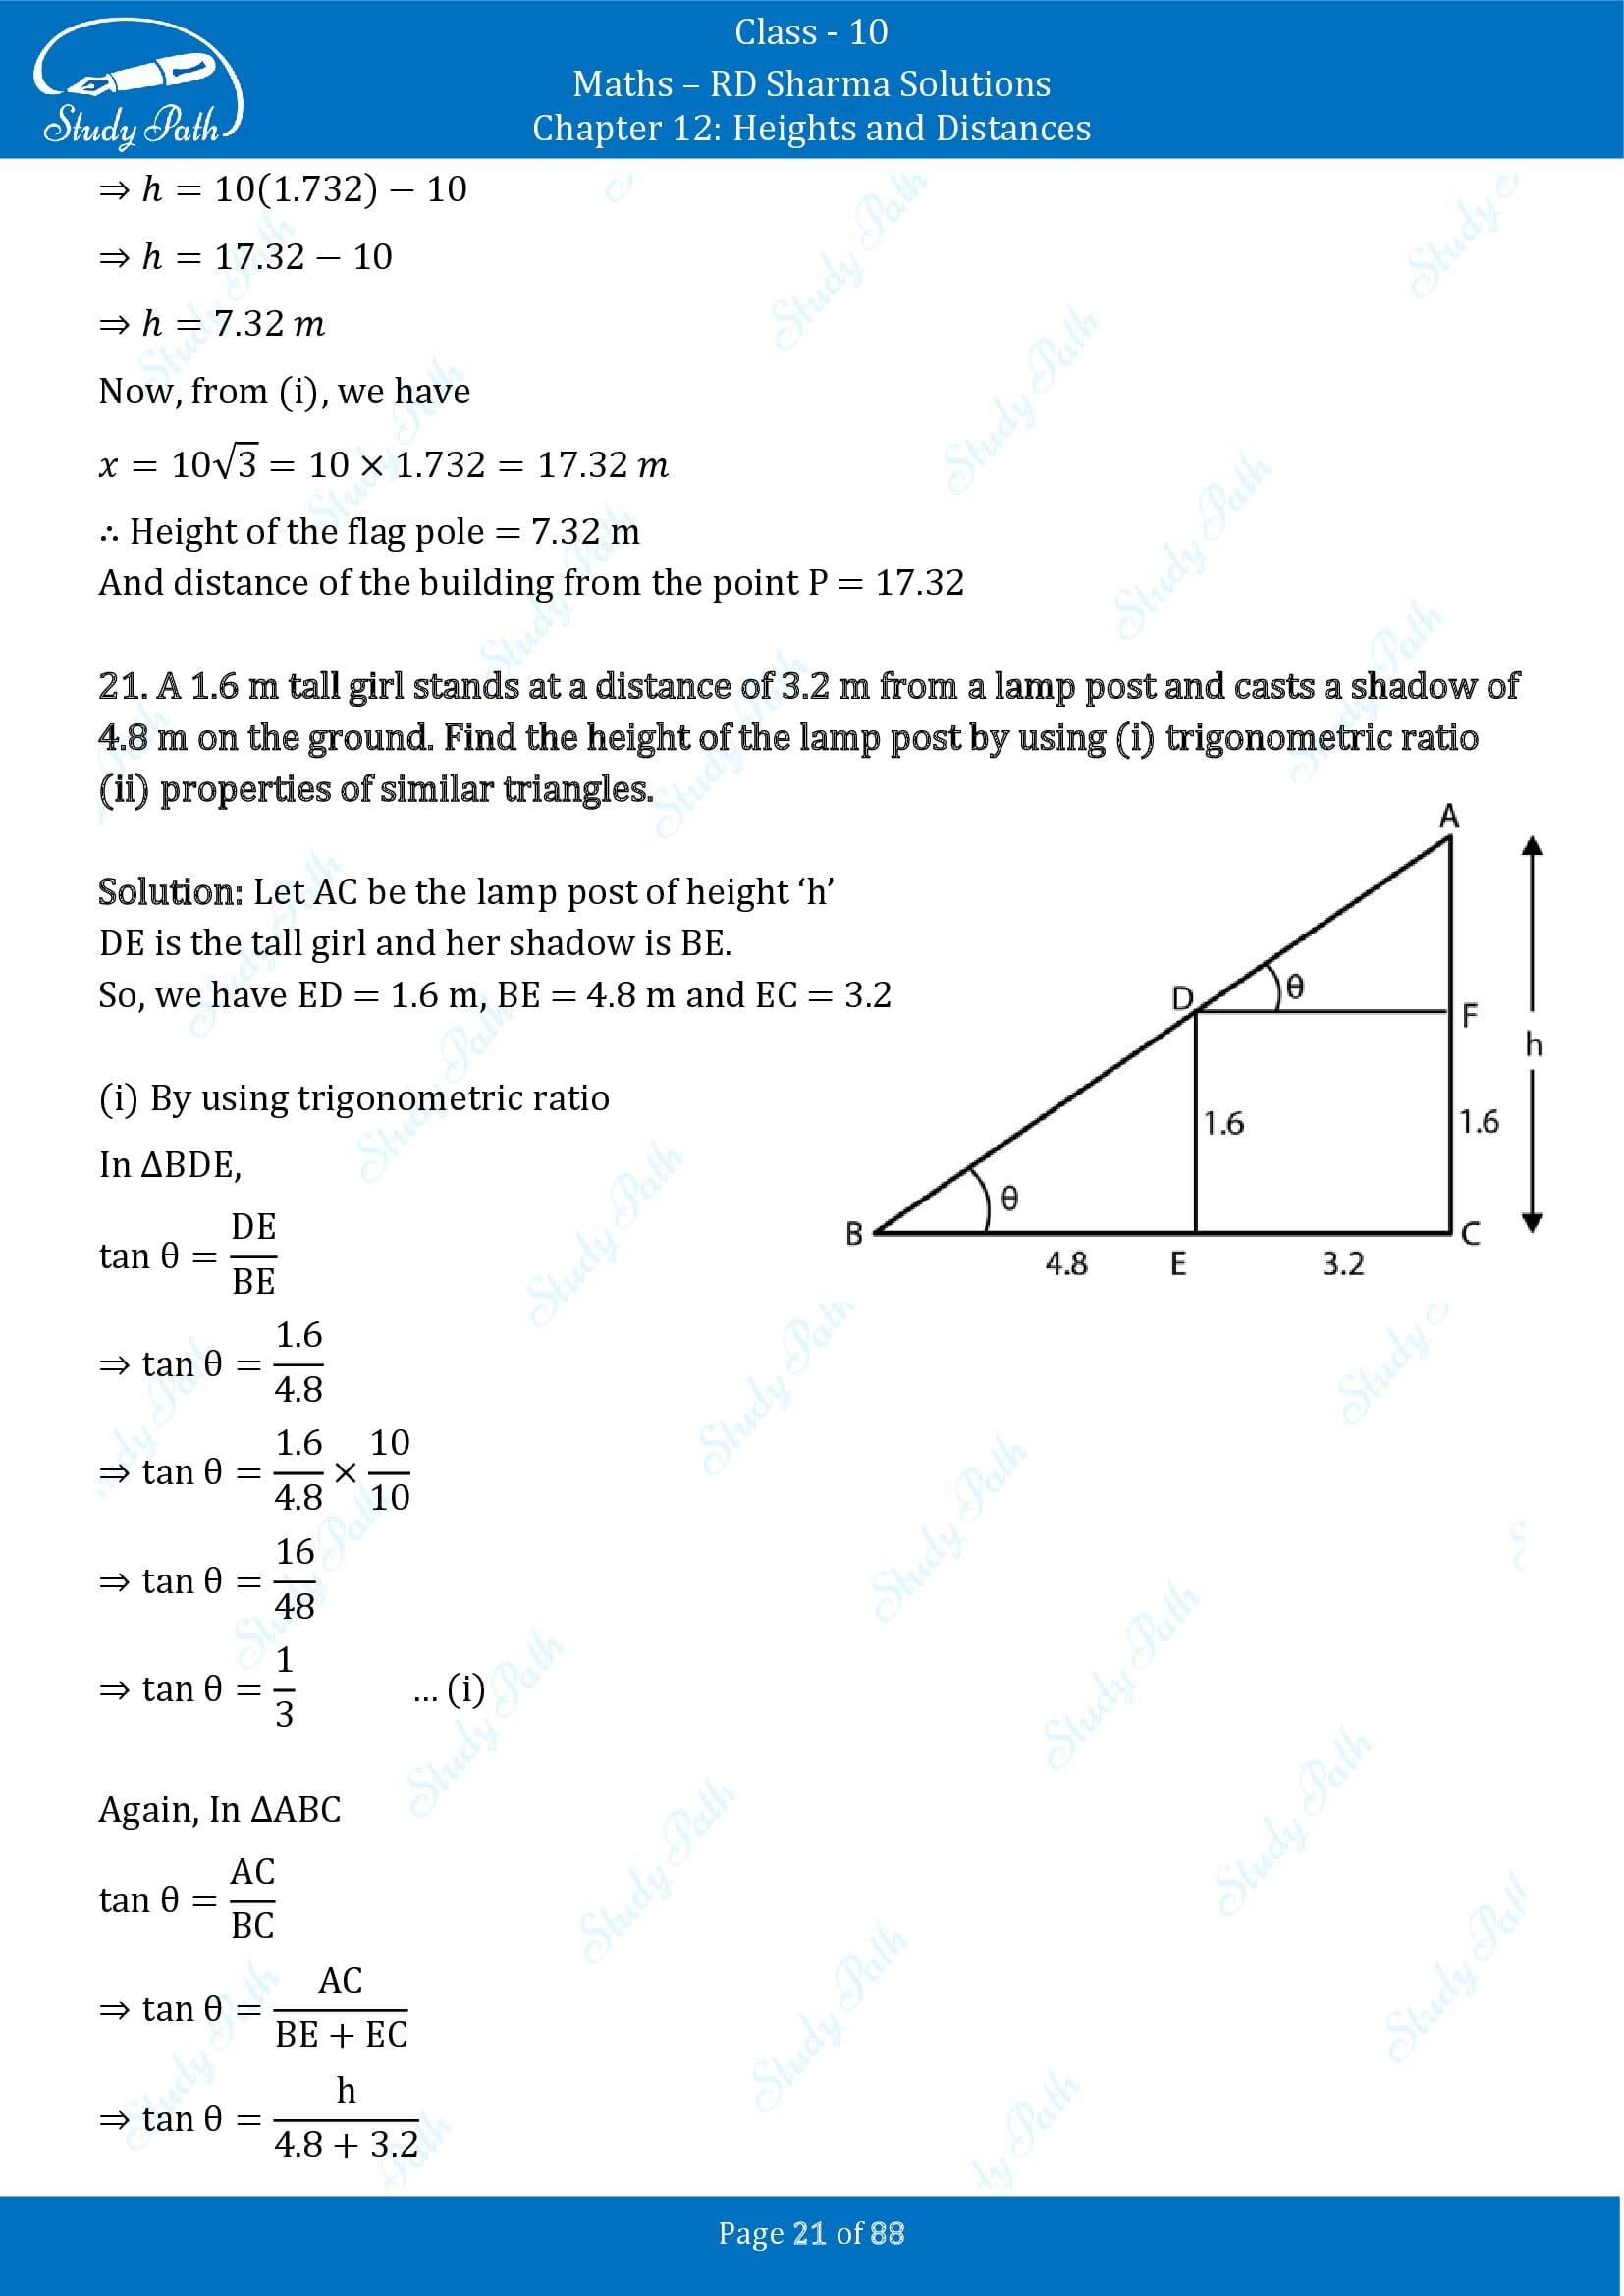 RD Sharma Solutions Class 10 Chapter 12 Heights and Distances Exercise 12.1 00021